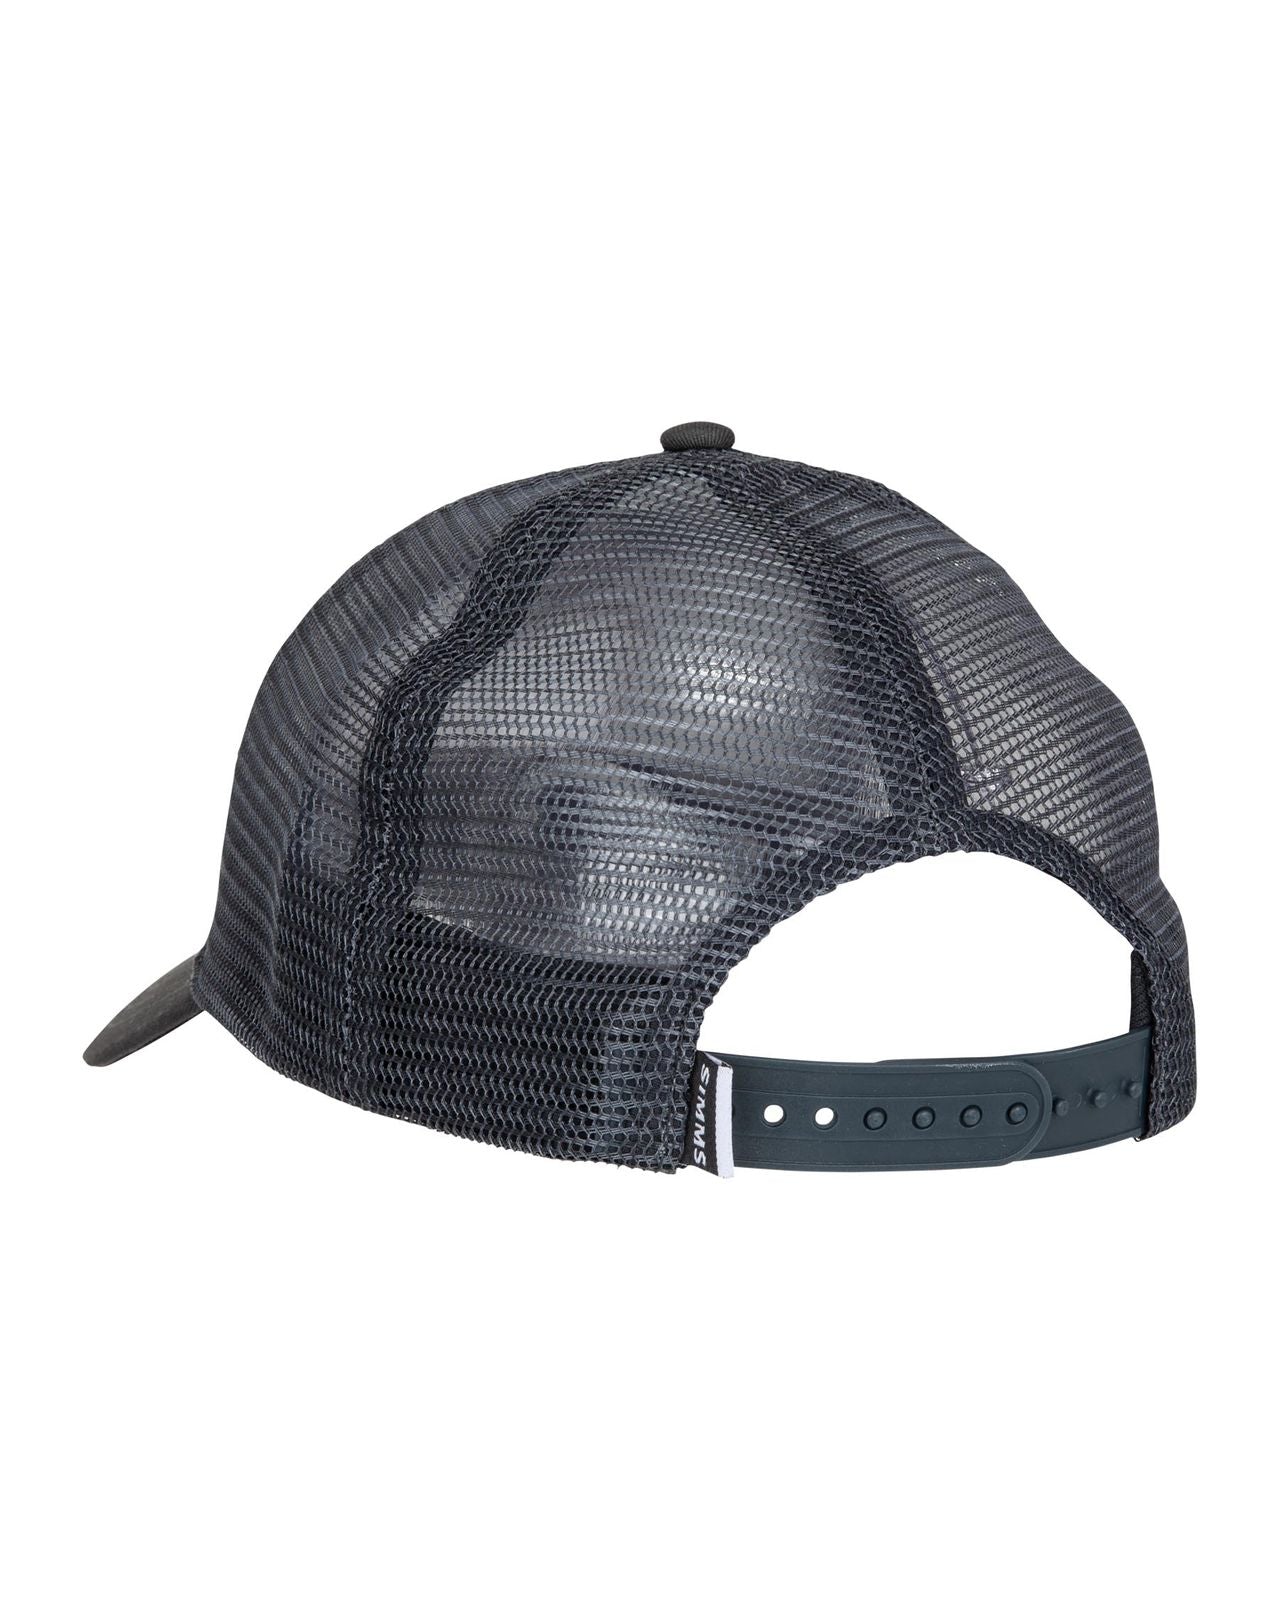 SIMMS TROUT ICON TRUCKER CARBON